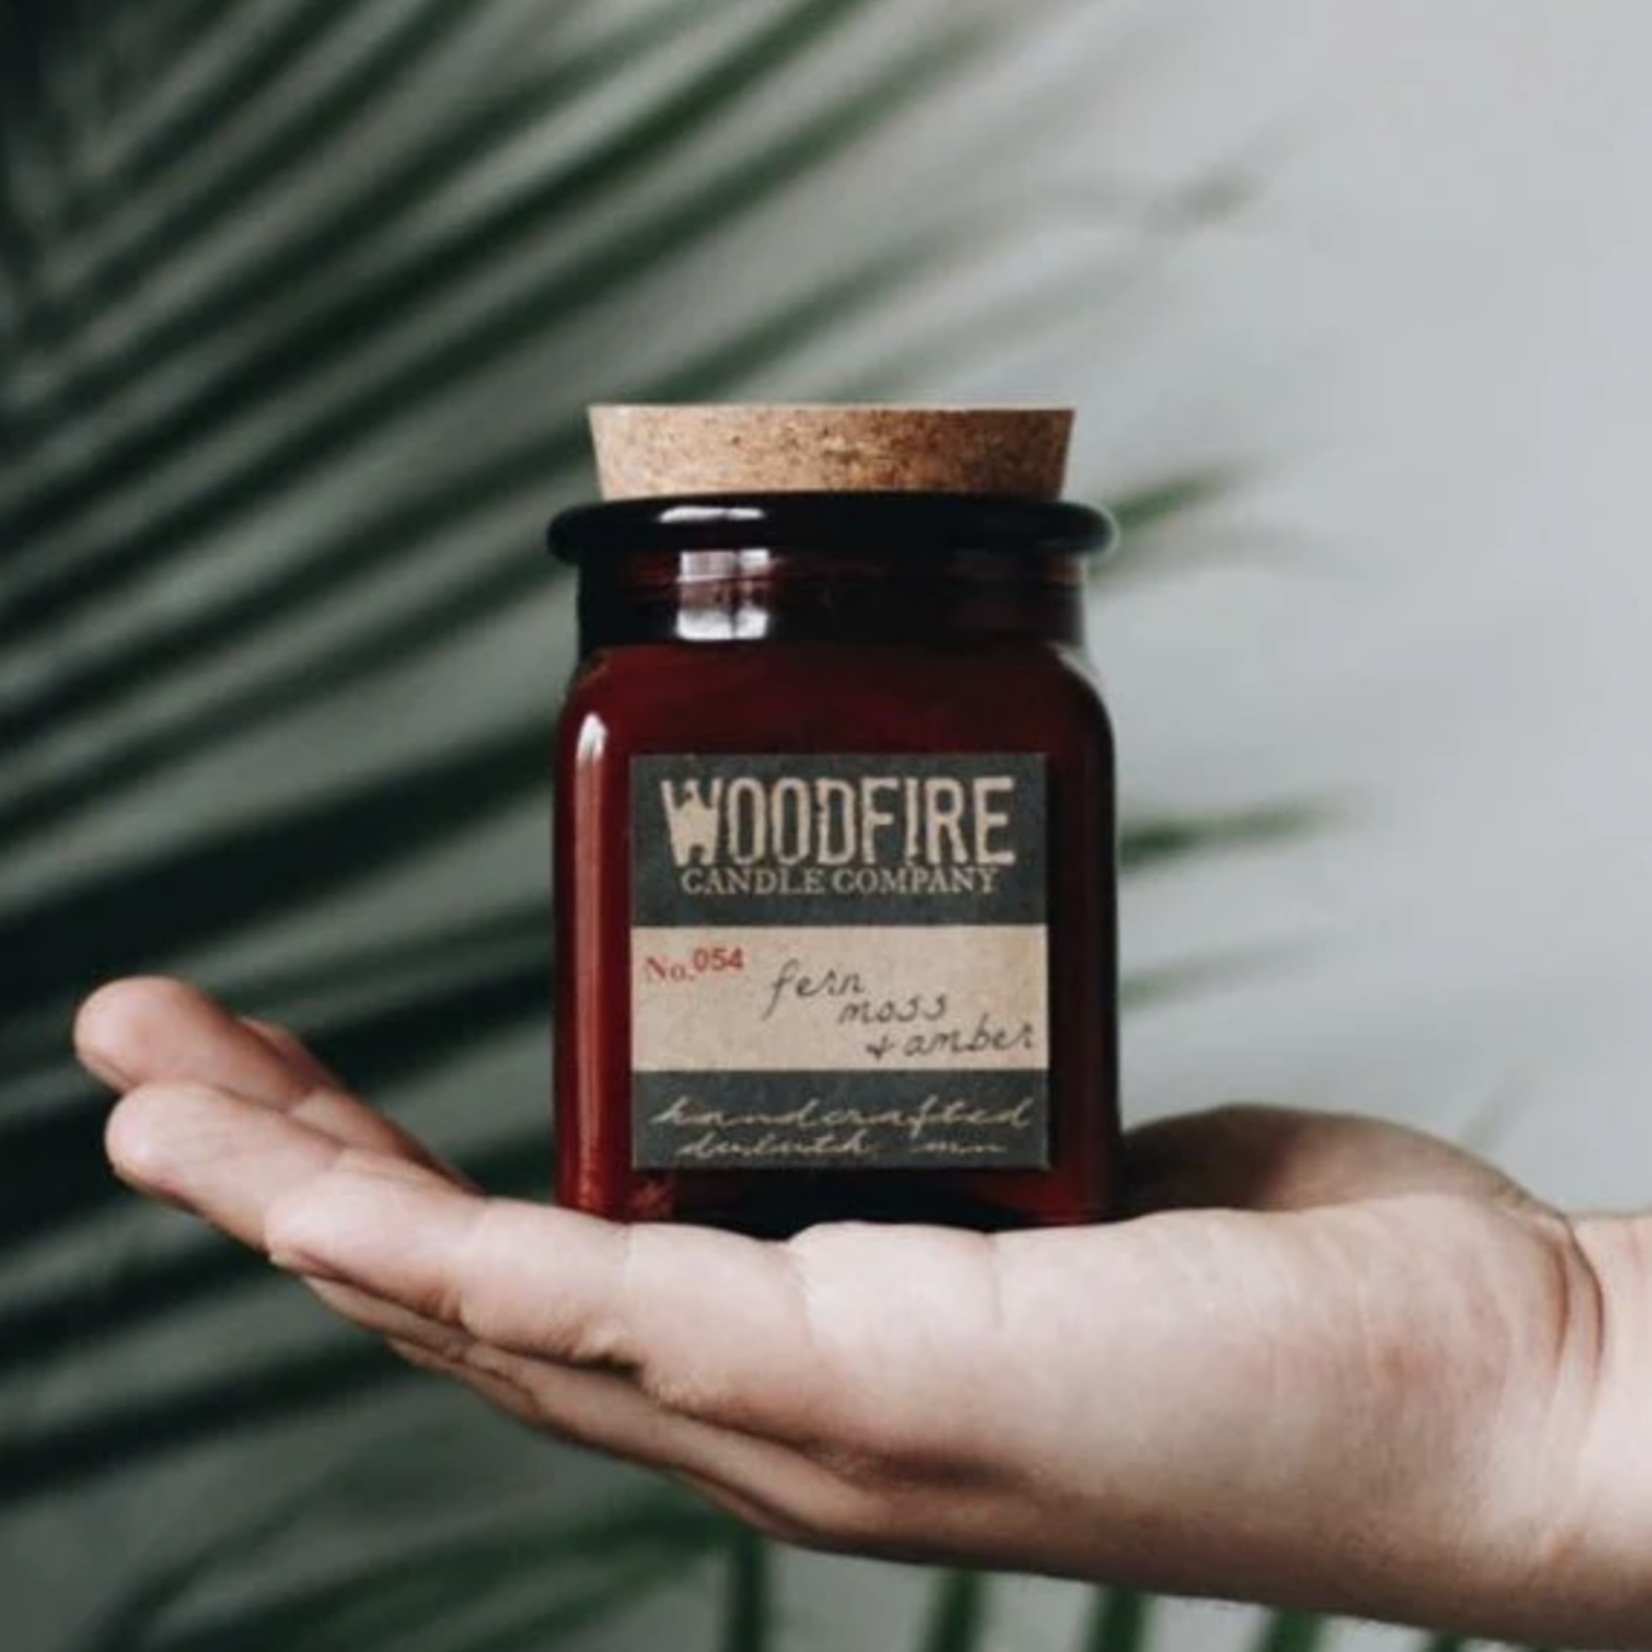 Woodfire Candle Co Woodfire Candle, Amber Apothecary